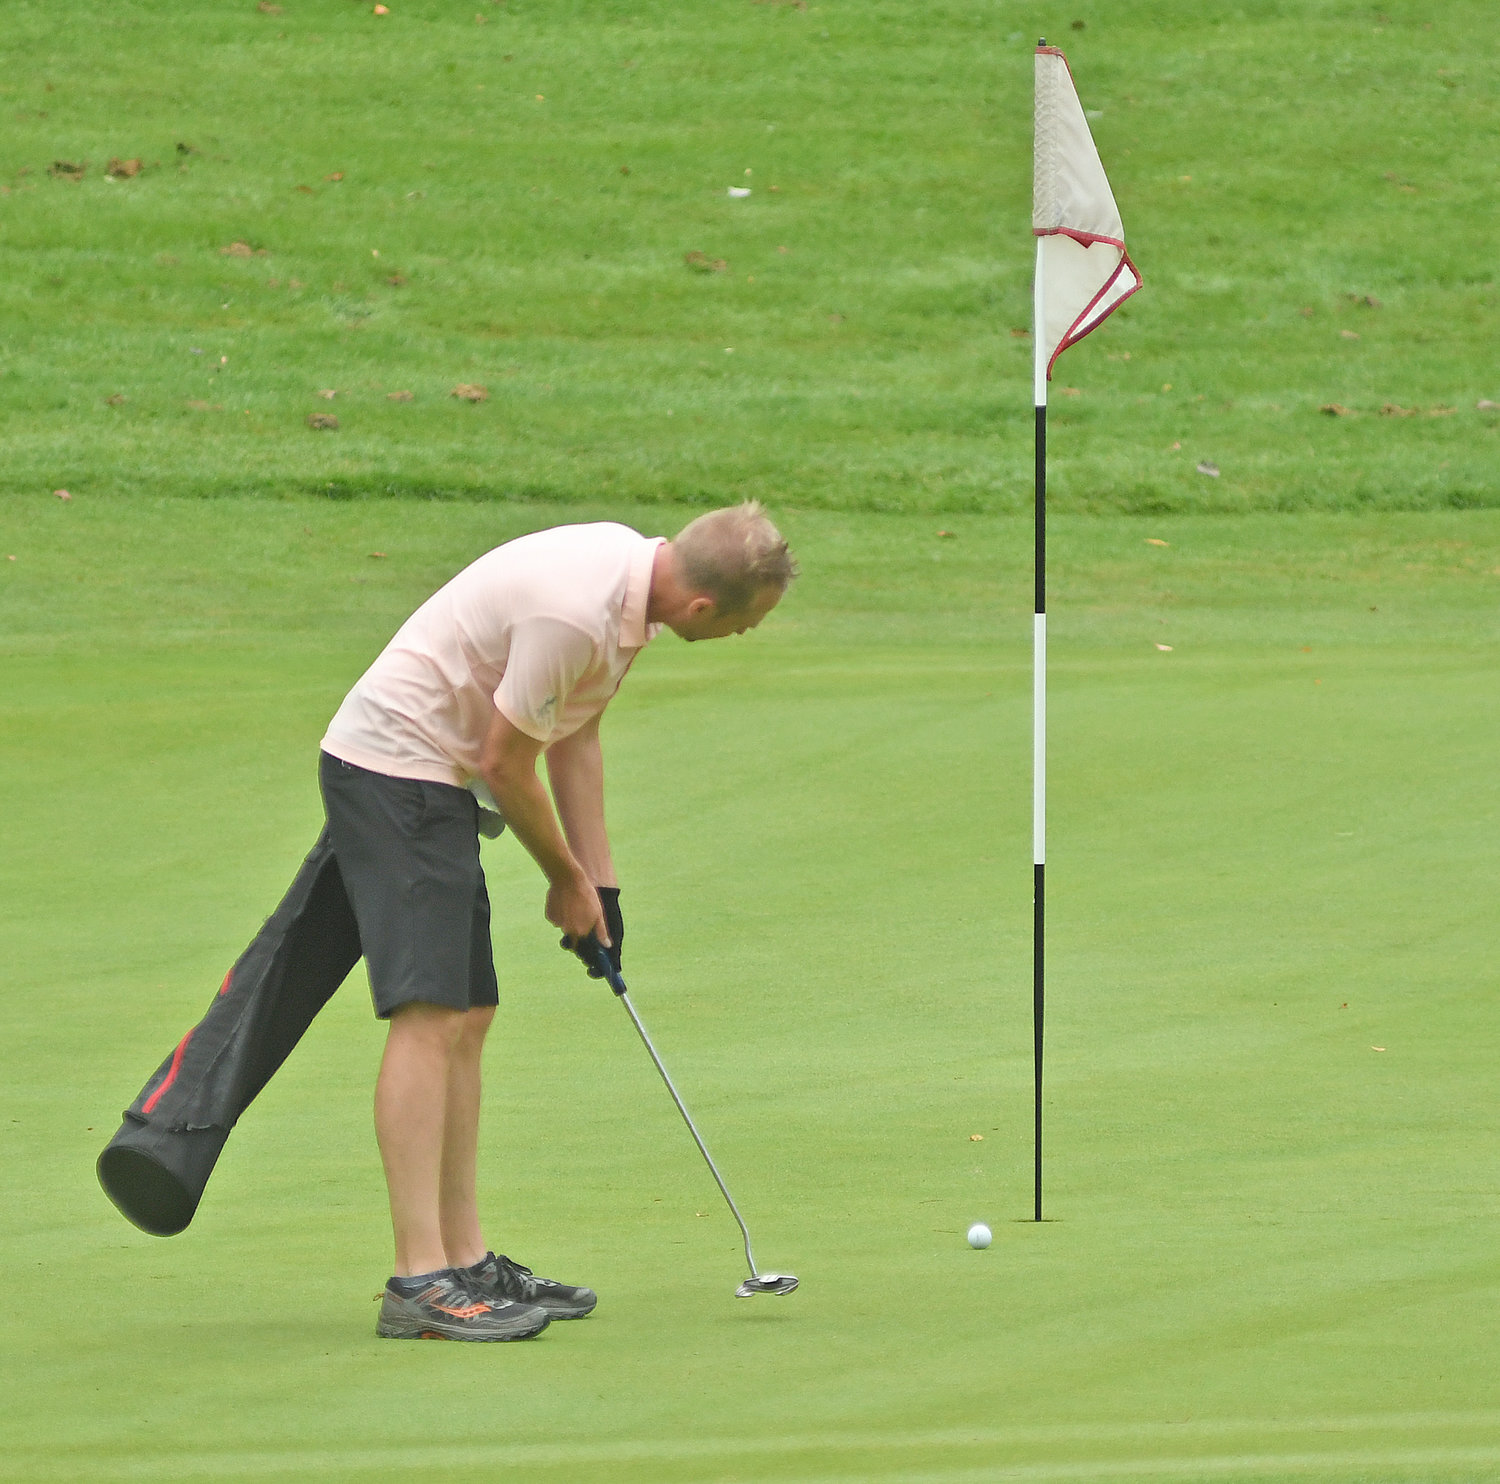 TAP IT IN — Rome's Wes Cupp putts for birdie on the par 5 7th hole, but it lipped out and he made the tap-in par during the second round of the Thirsty Owl New York Speedgolf Open at Rome Country Club on Monday morning.